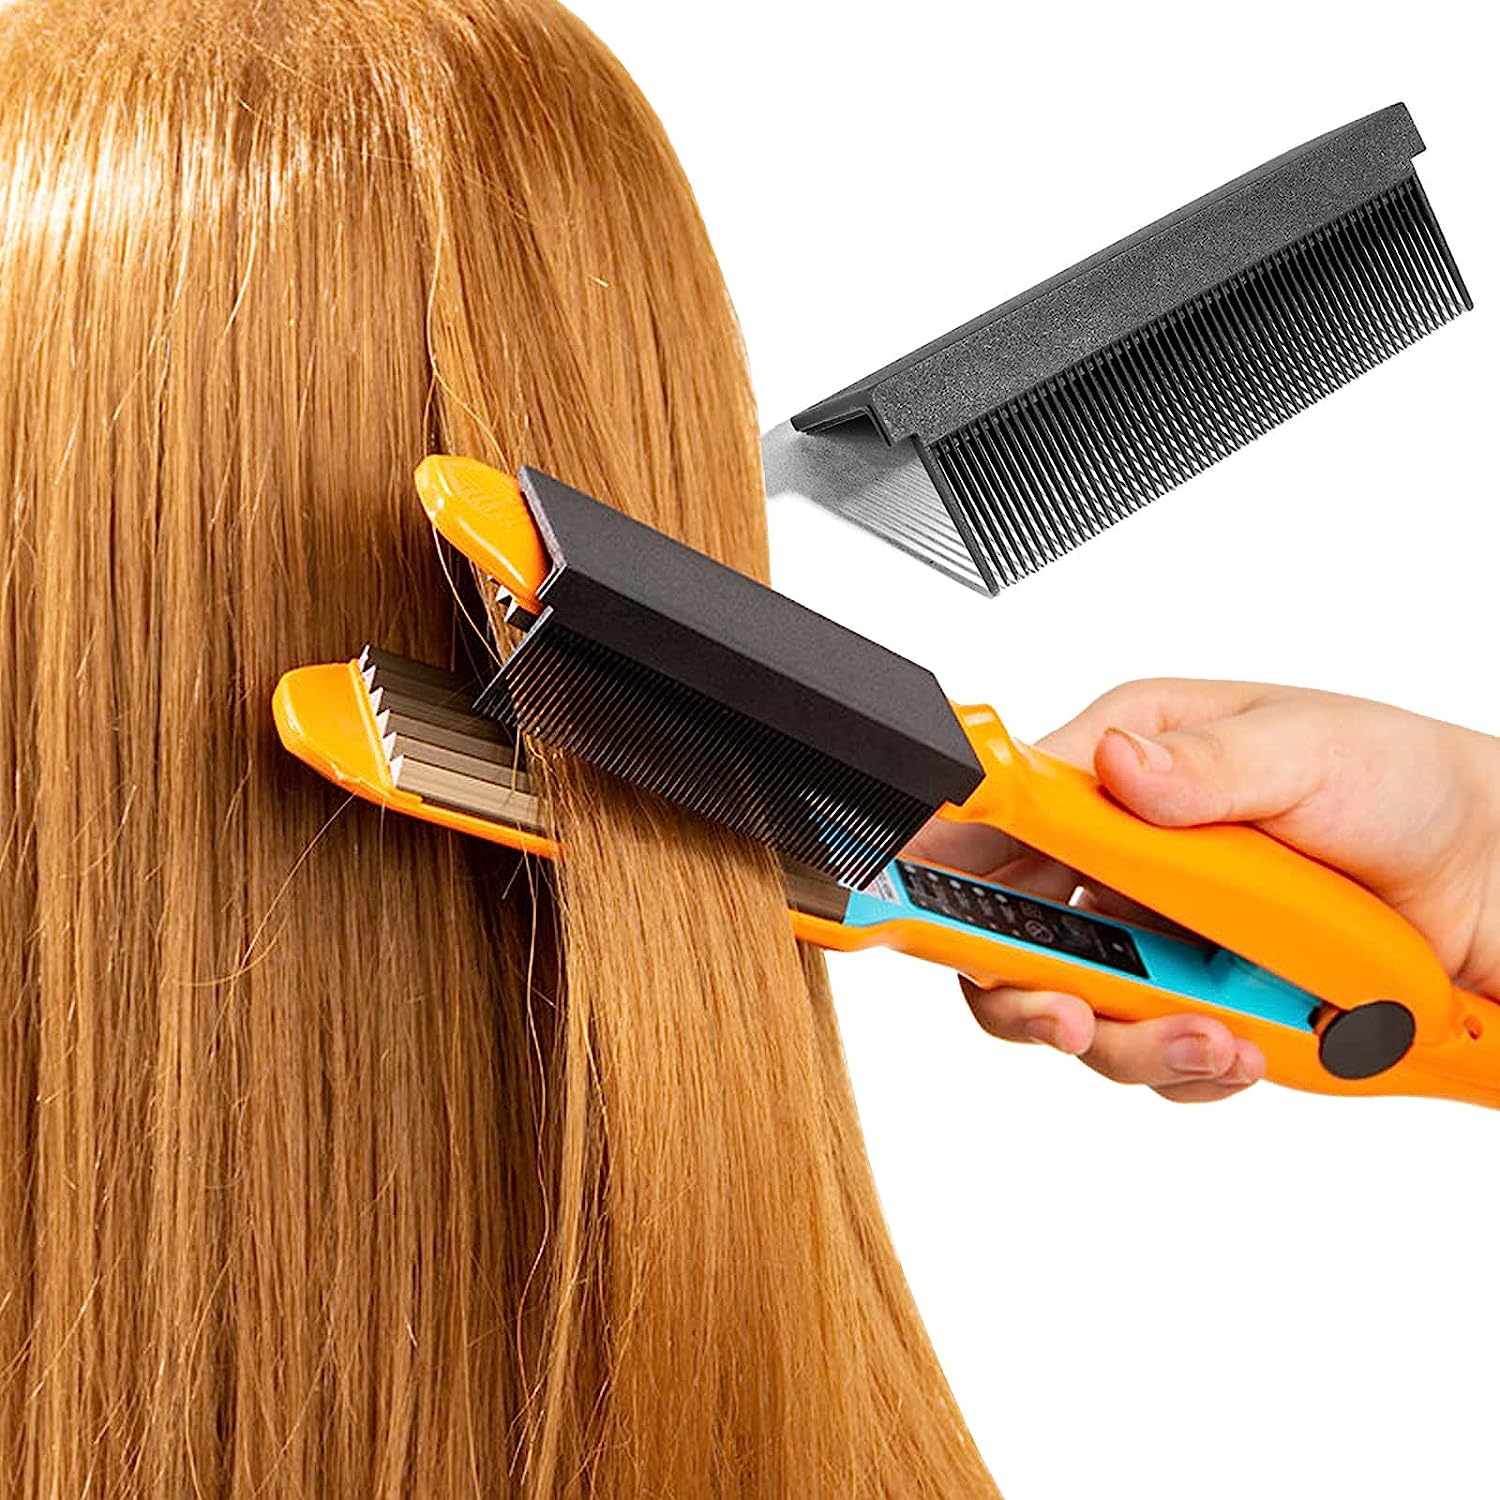 THE GLISS COMB (BUY 1 GET 1 FREE!)